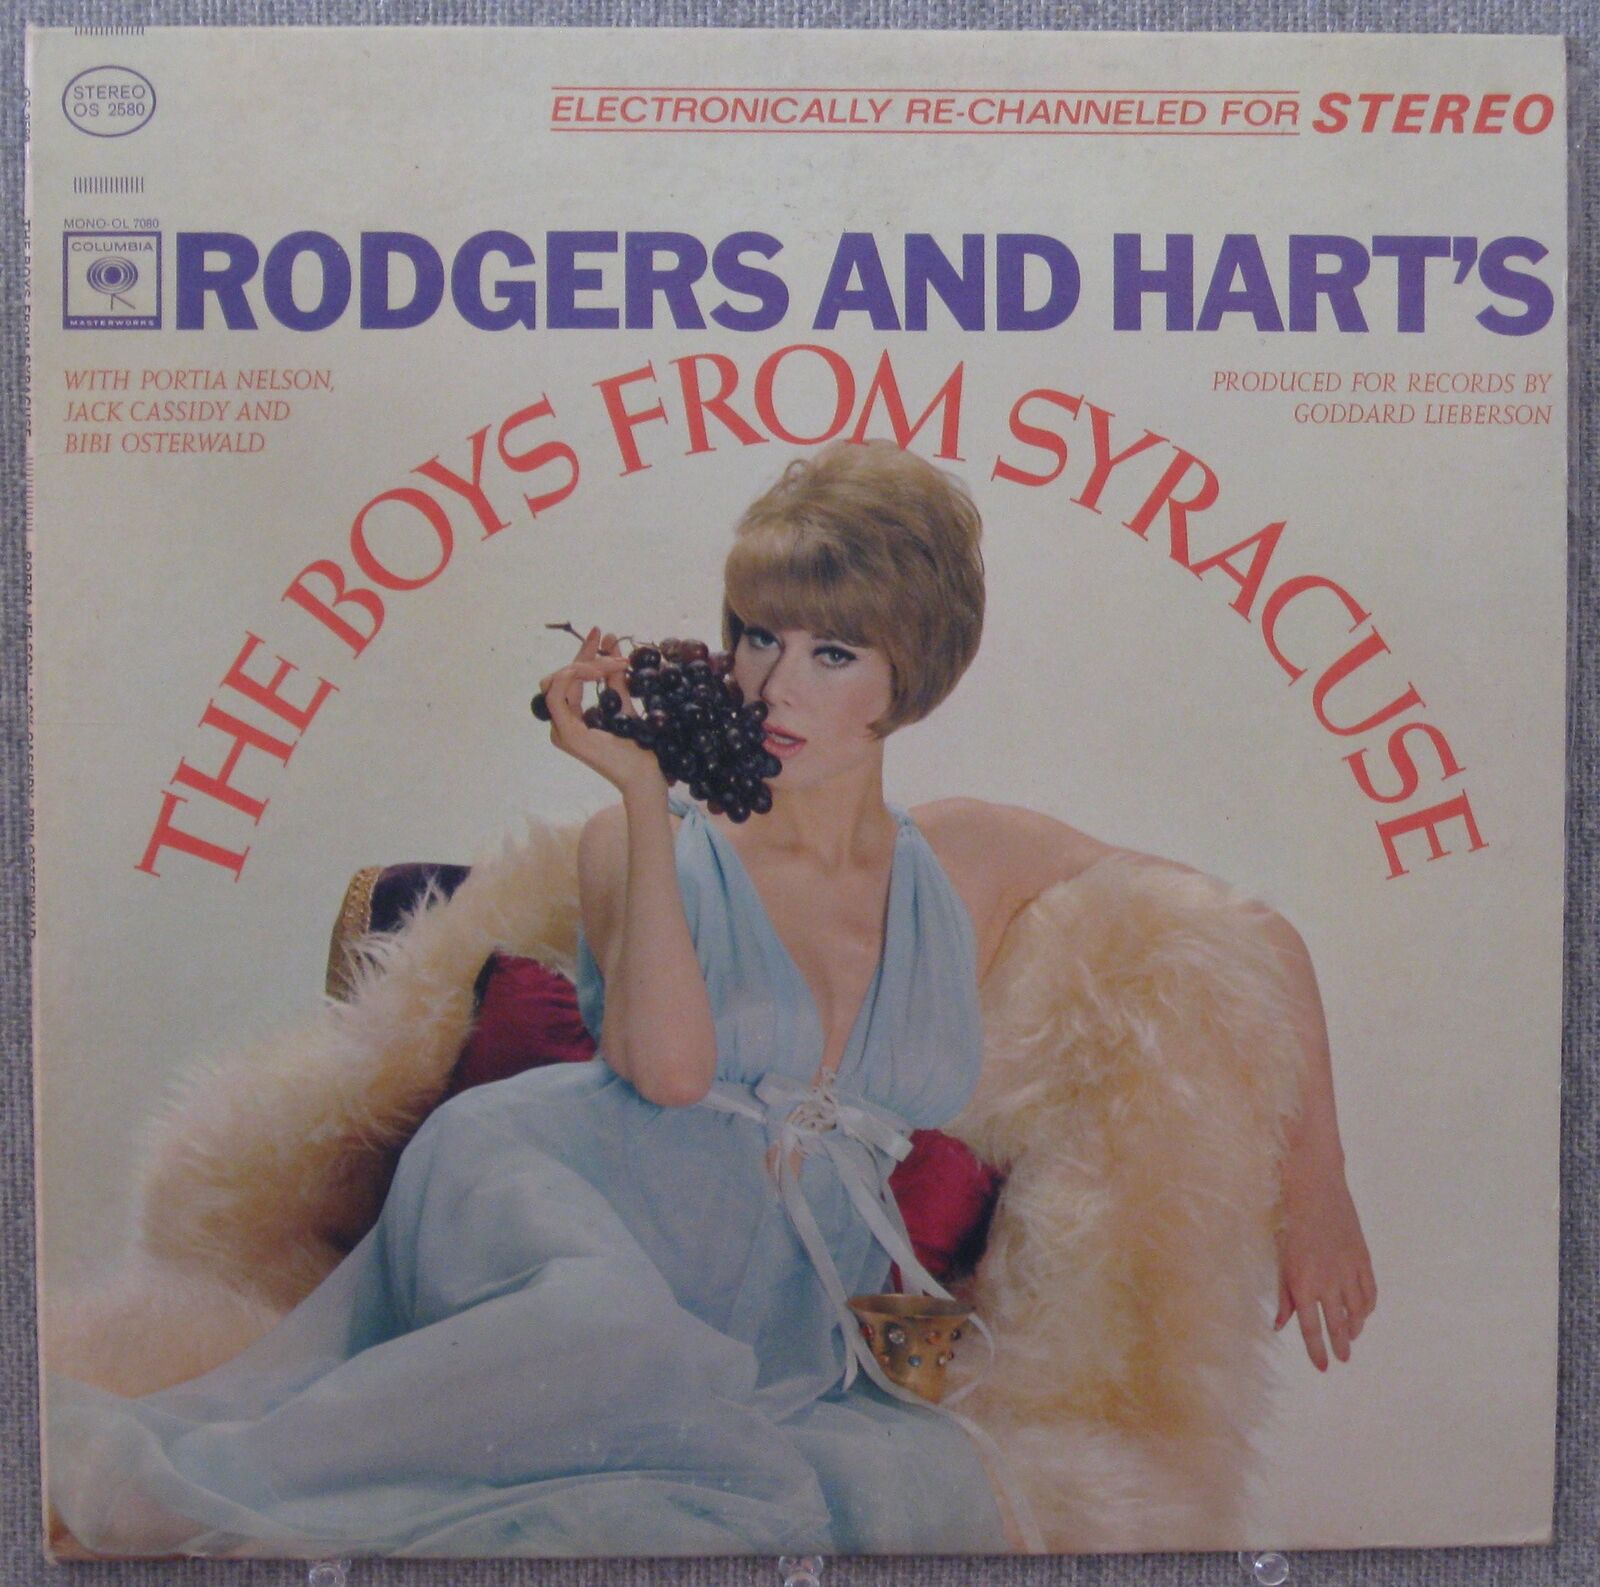 Rodgers and Hart's The Boys From Syracuse [Vinyl] Portia Nelson, Jack Cassidy...